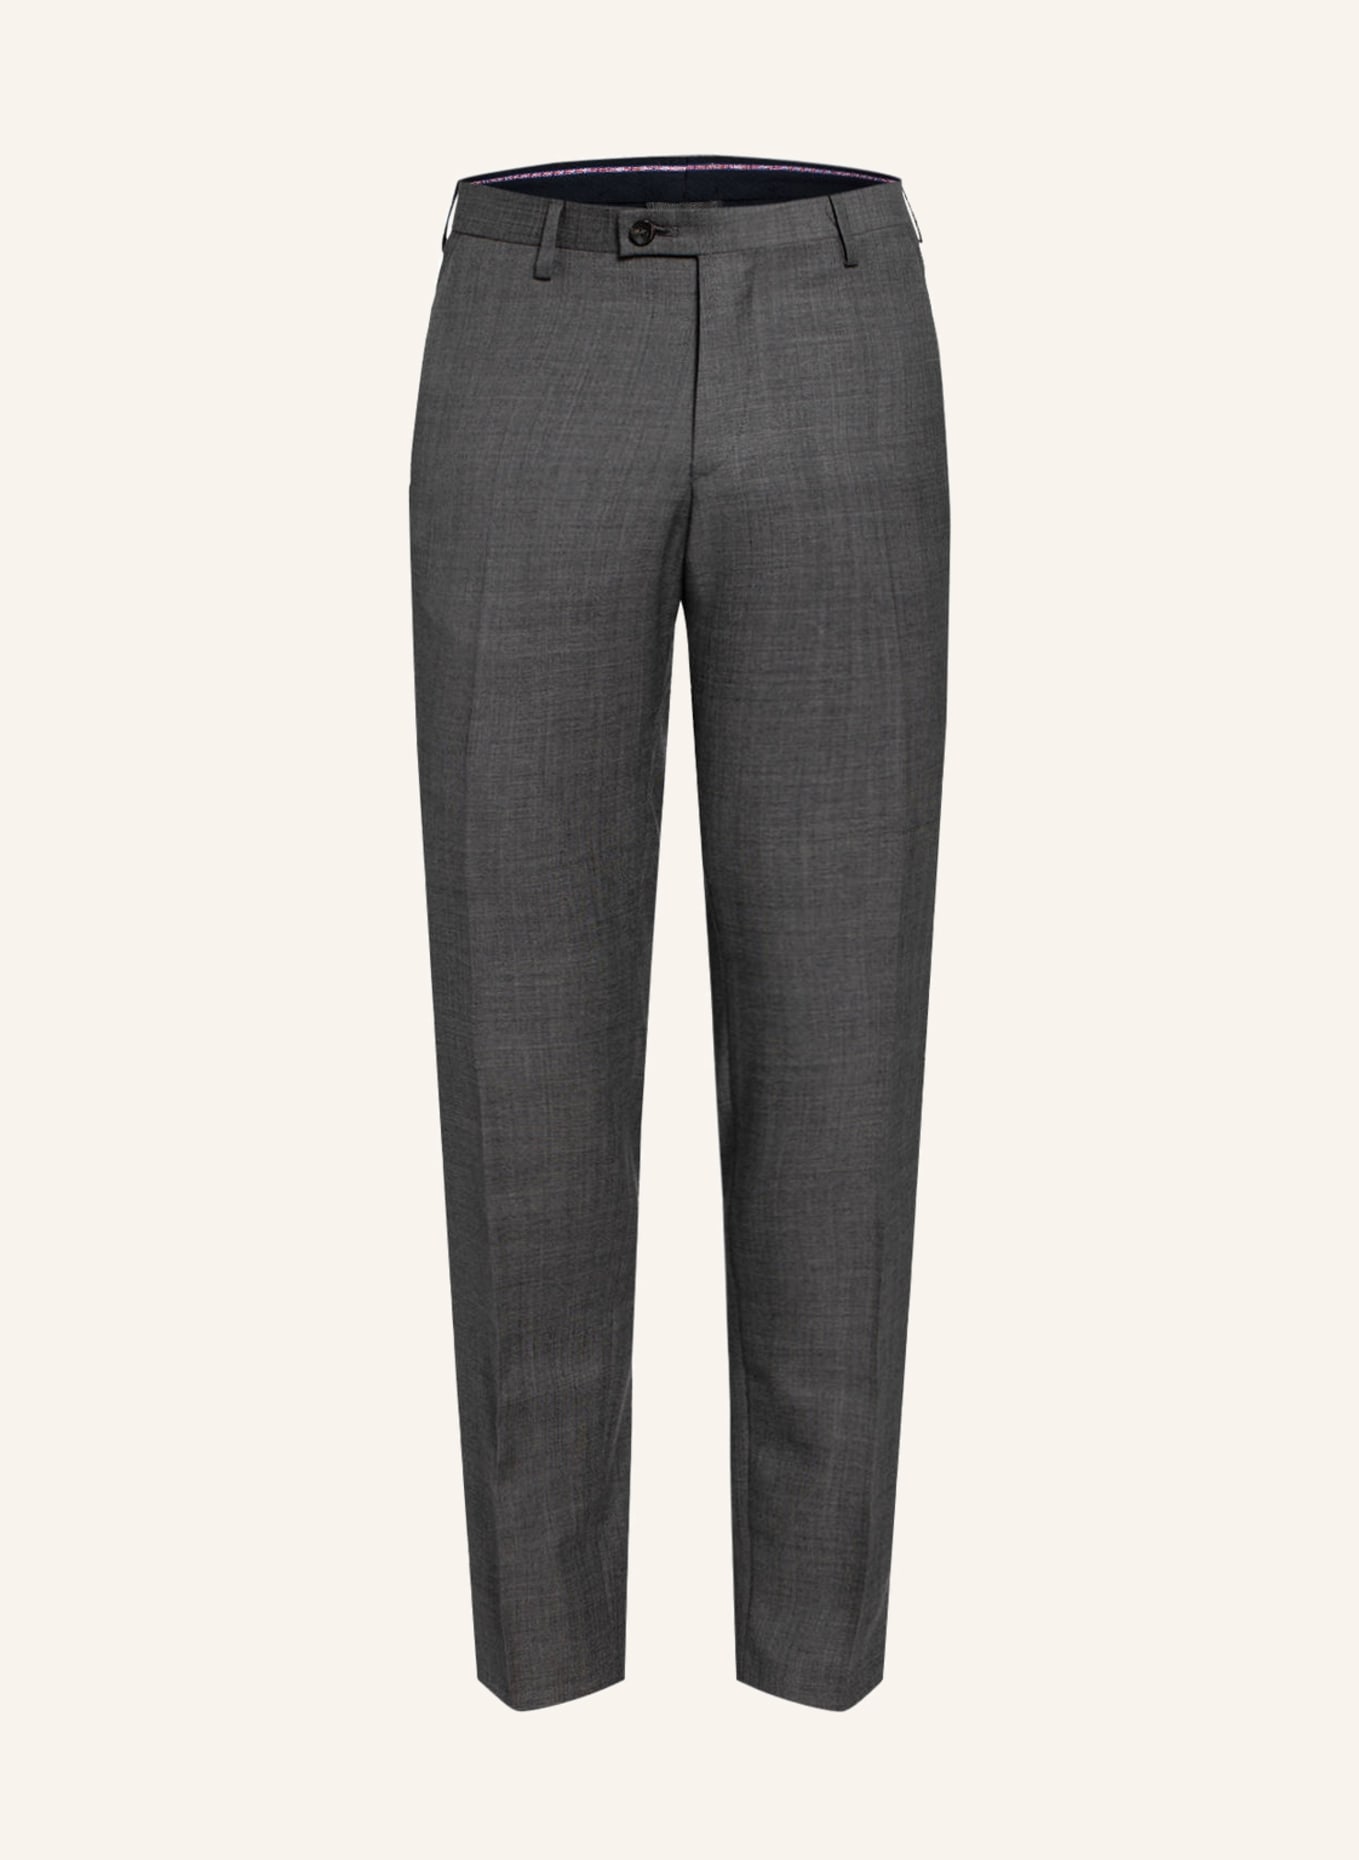 CG - CLUB of GENTS Suit trousers CHAZ regular fit, Color: 81 grau hell (Image 1)